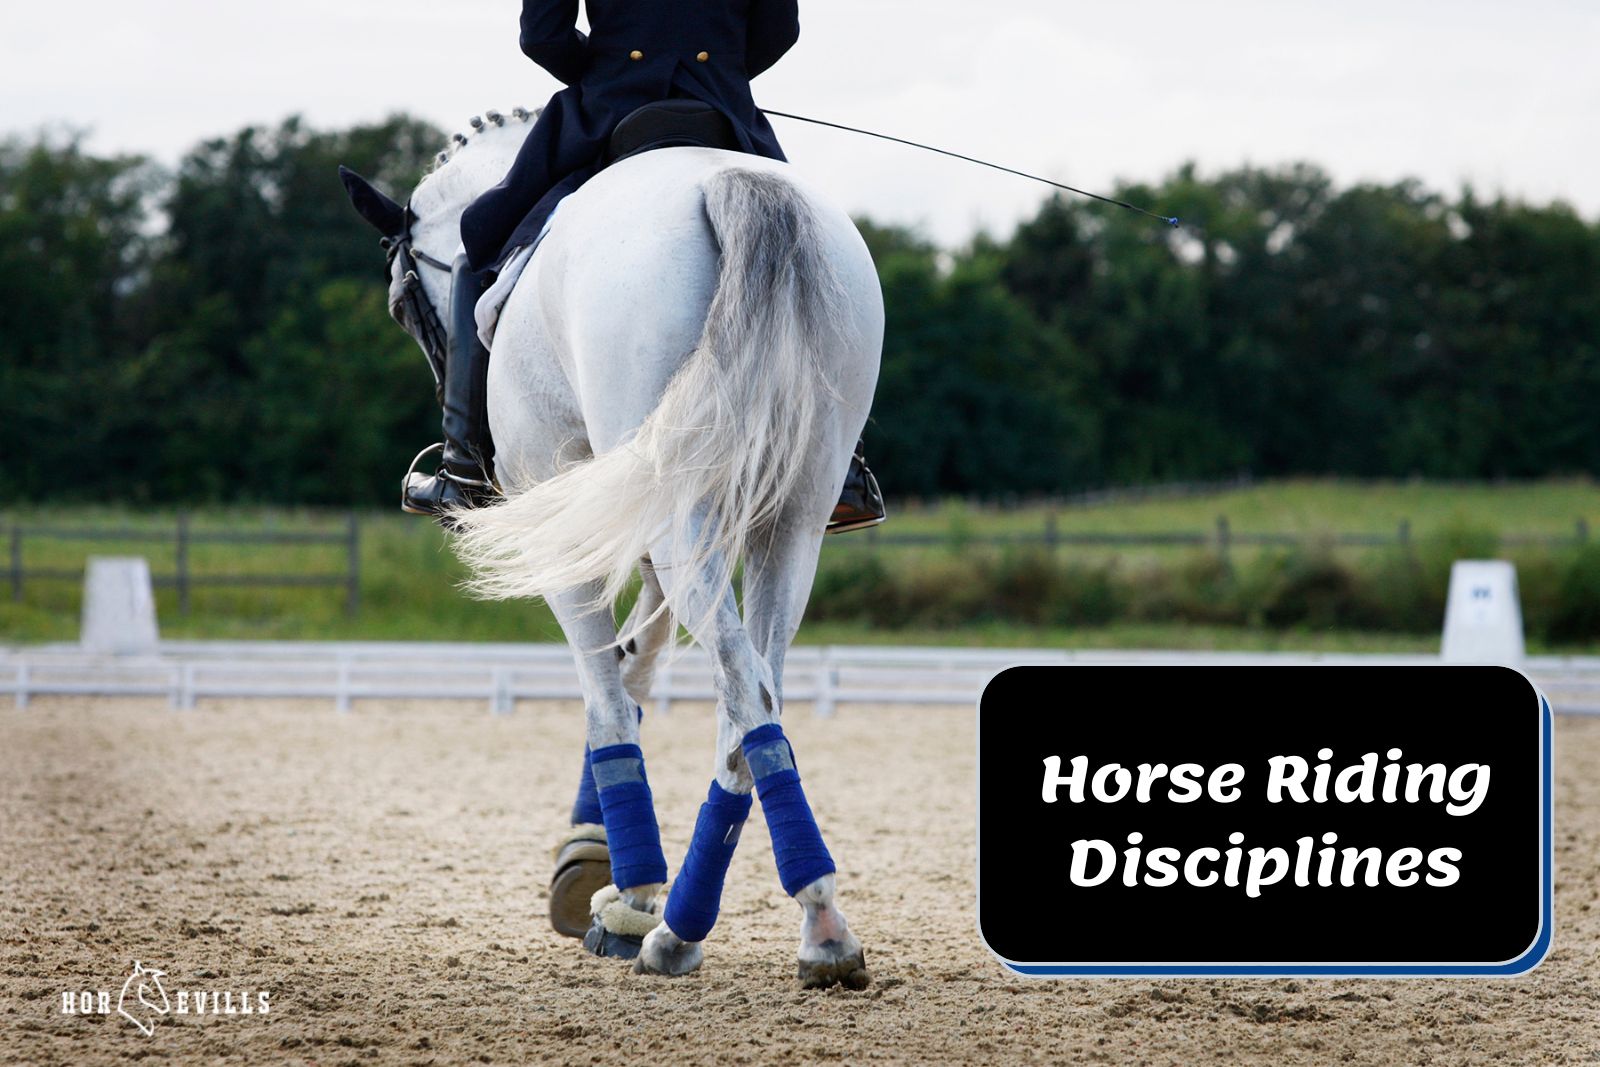 equestrian riding showing different horse riding disciplines